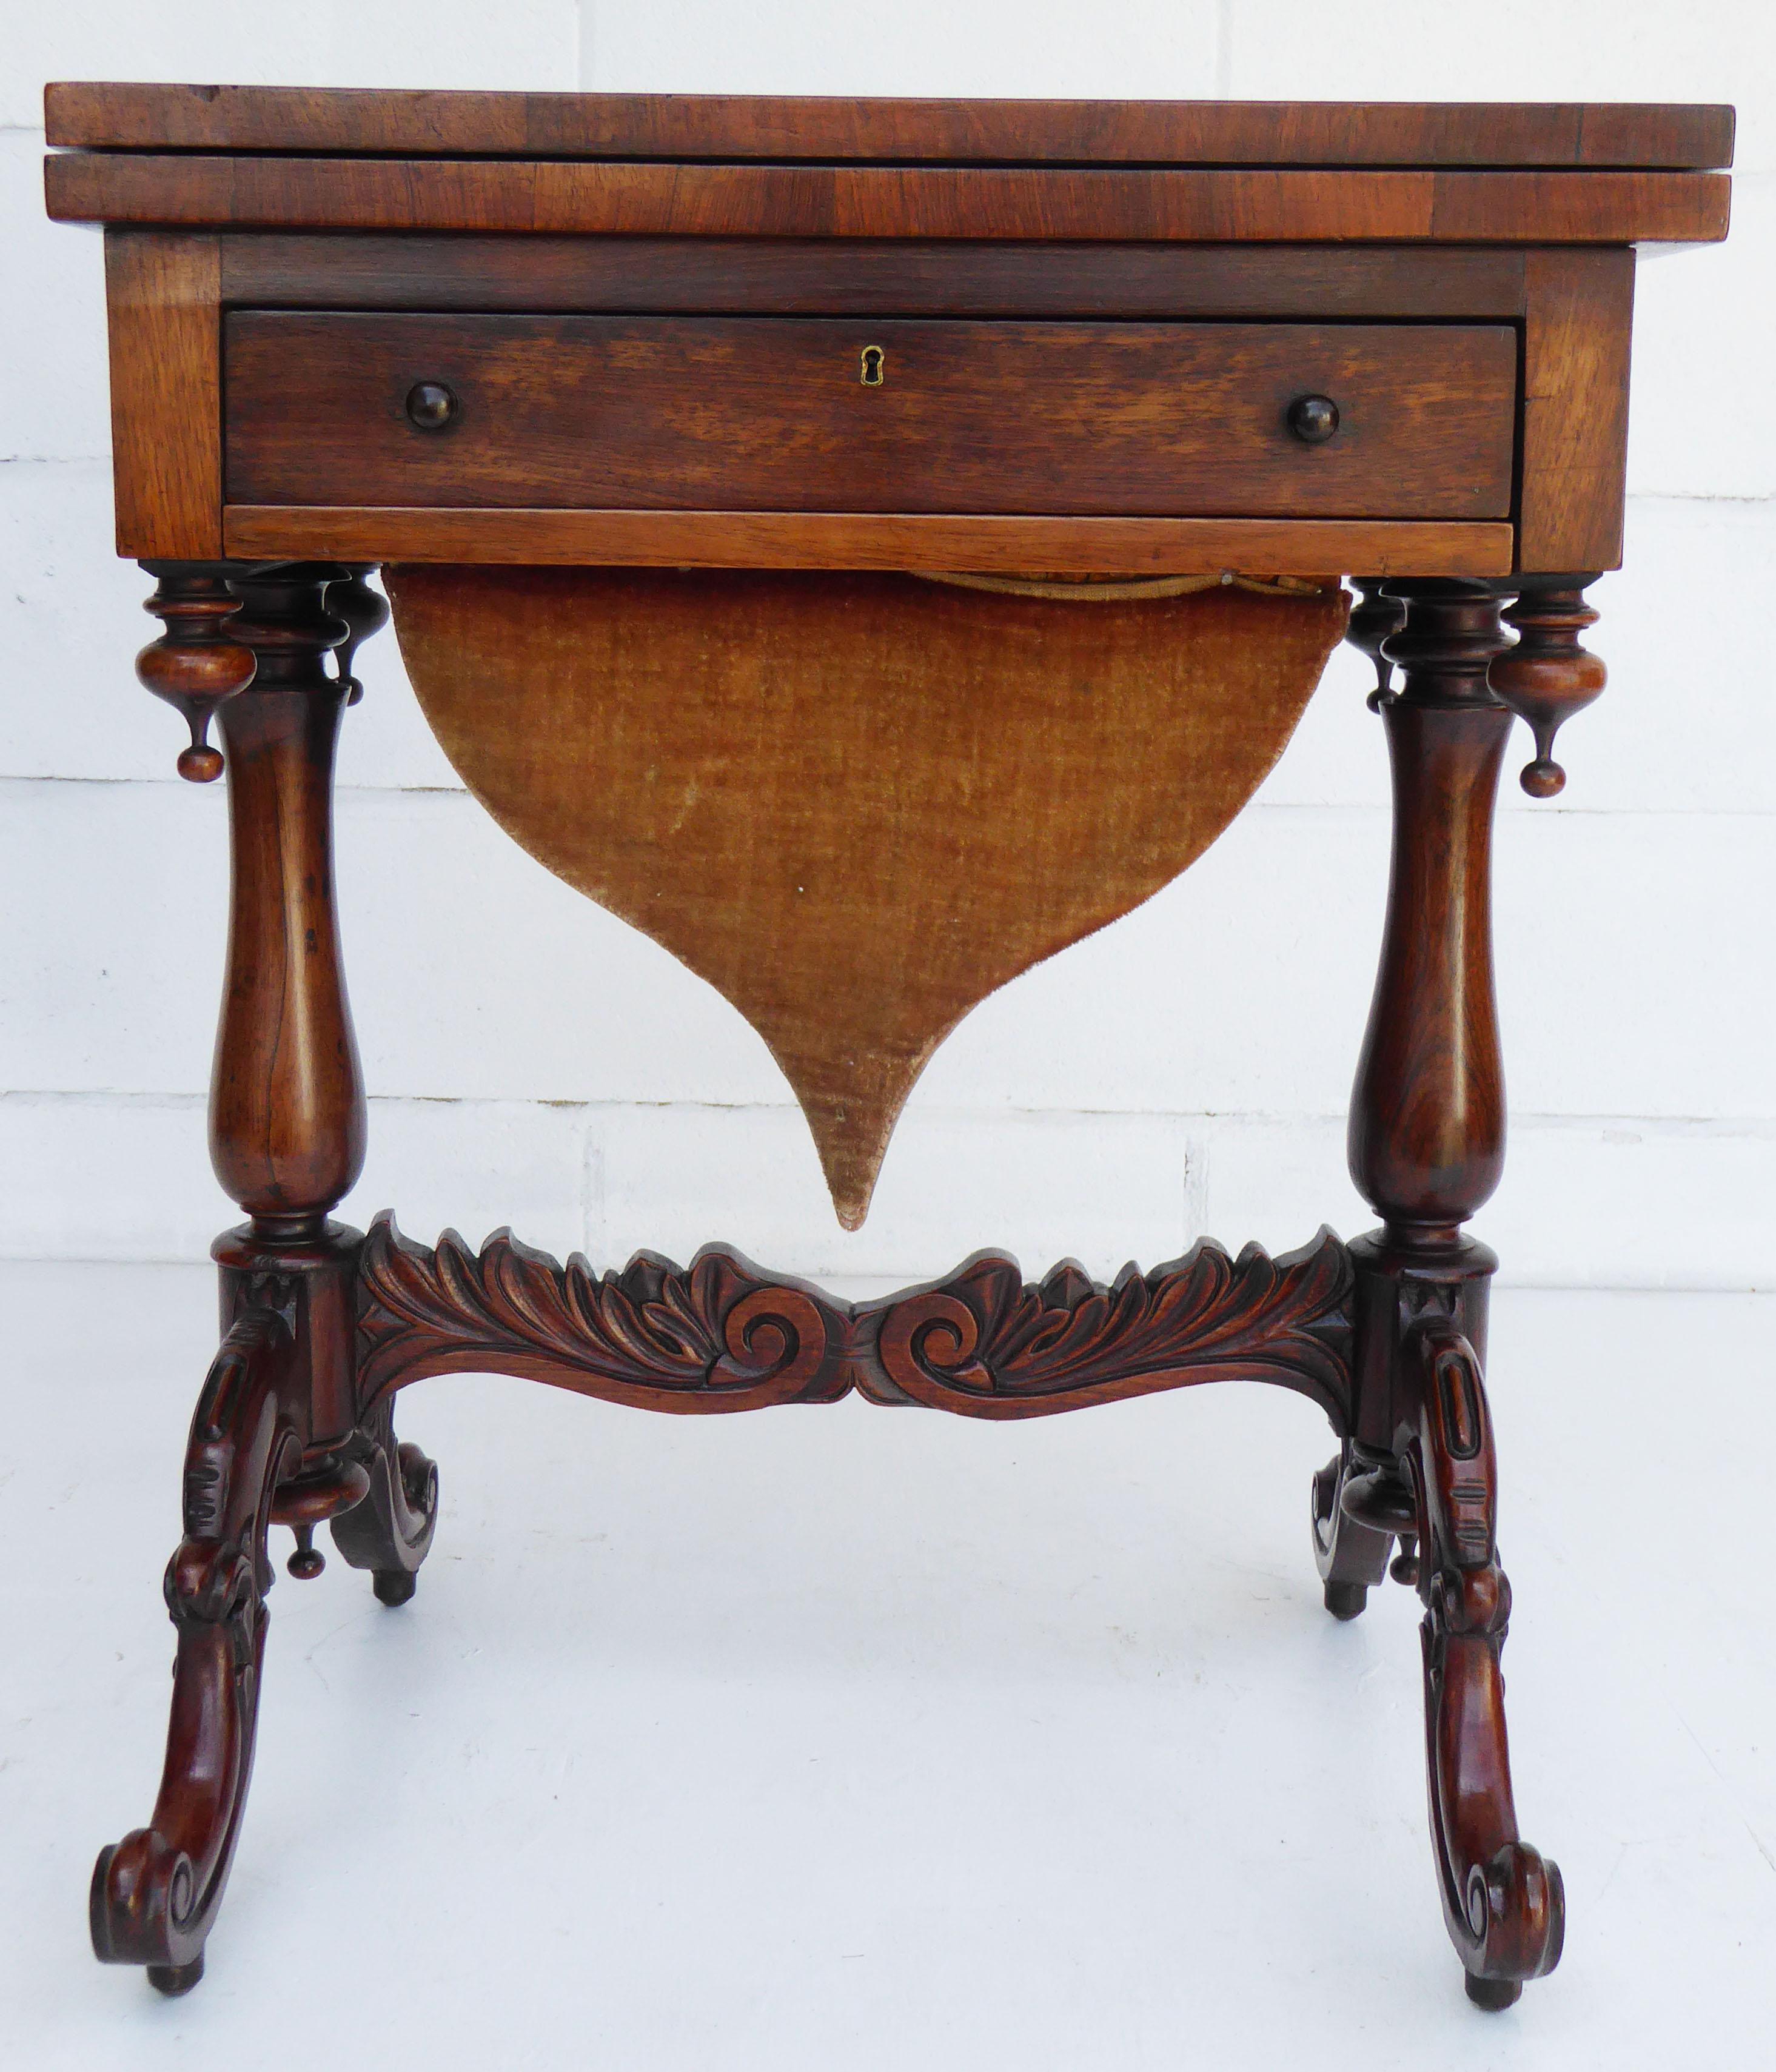 For sale is a good quality Victorian rosewood games table. The table has an inlaid top which swivels and folds over to reveal a chess board and backgammon. Below this is a single fitted drawer, for sewing utensils. This is above a large pullout /